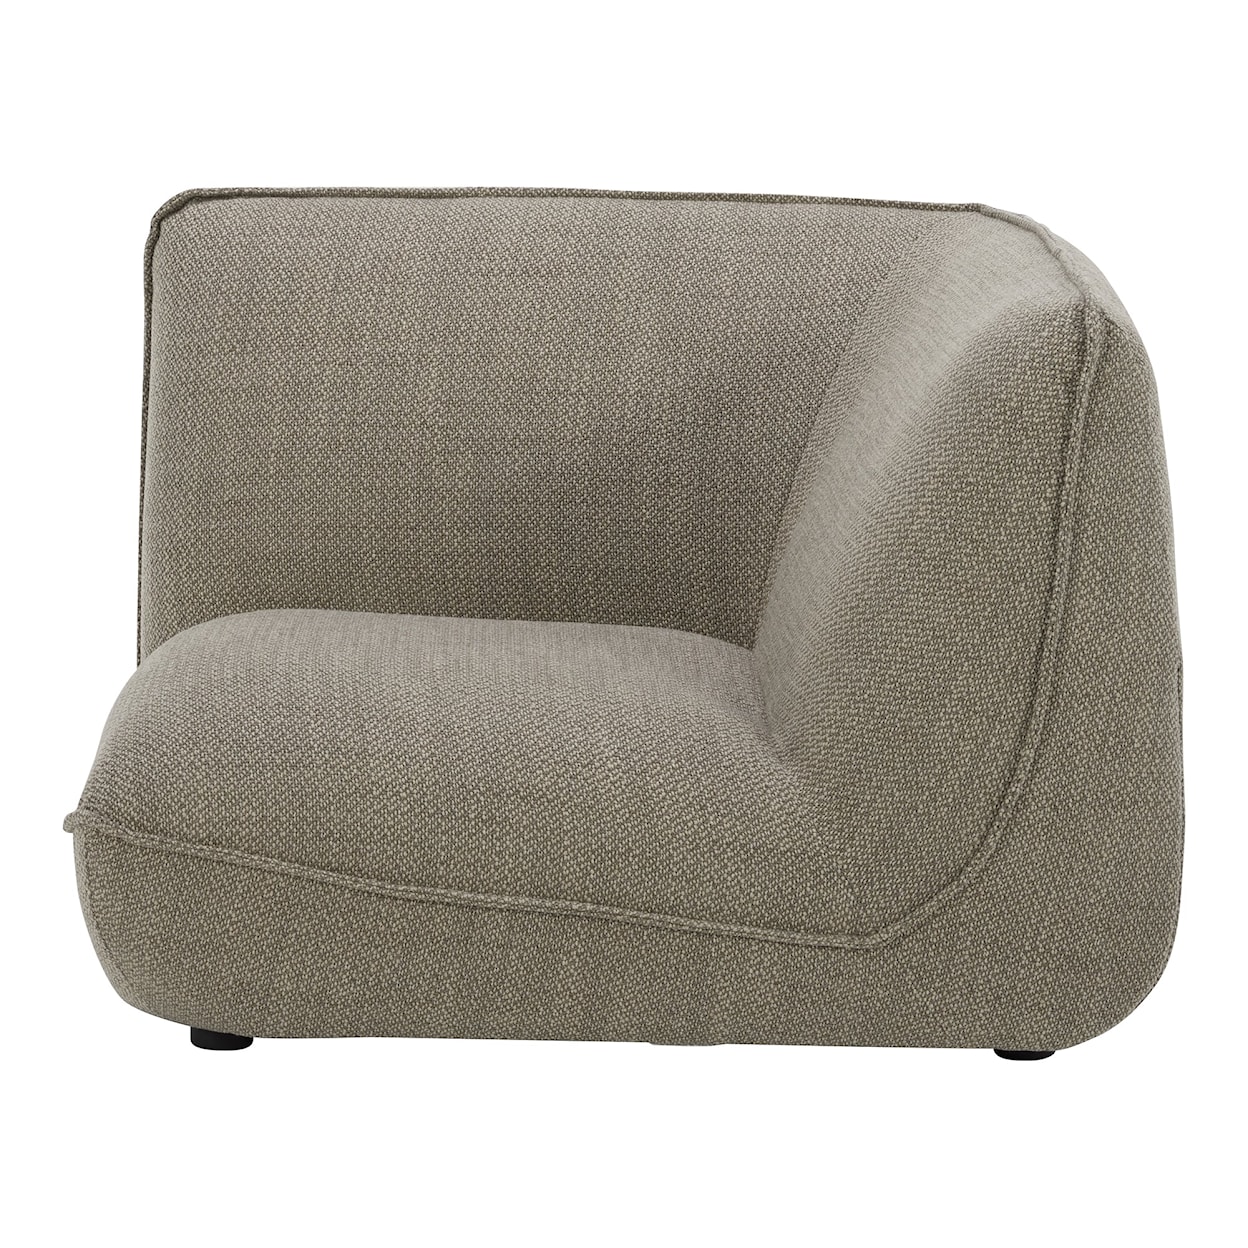 Moe's Home Collection Zeppelin Speckled Pumice Corner Chair